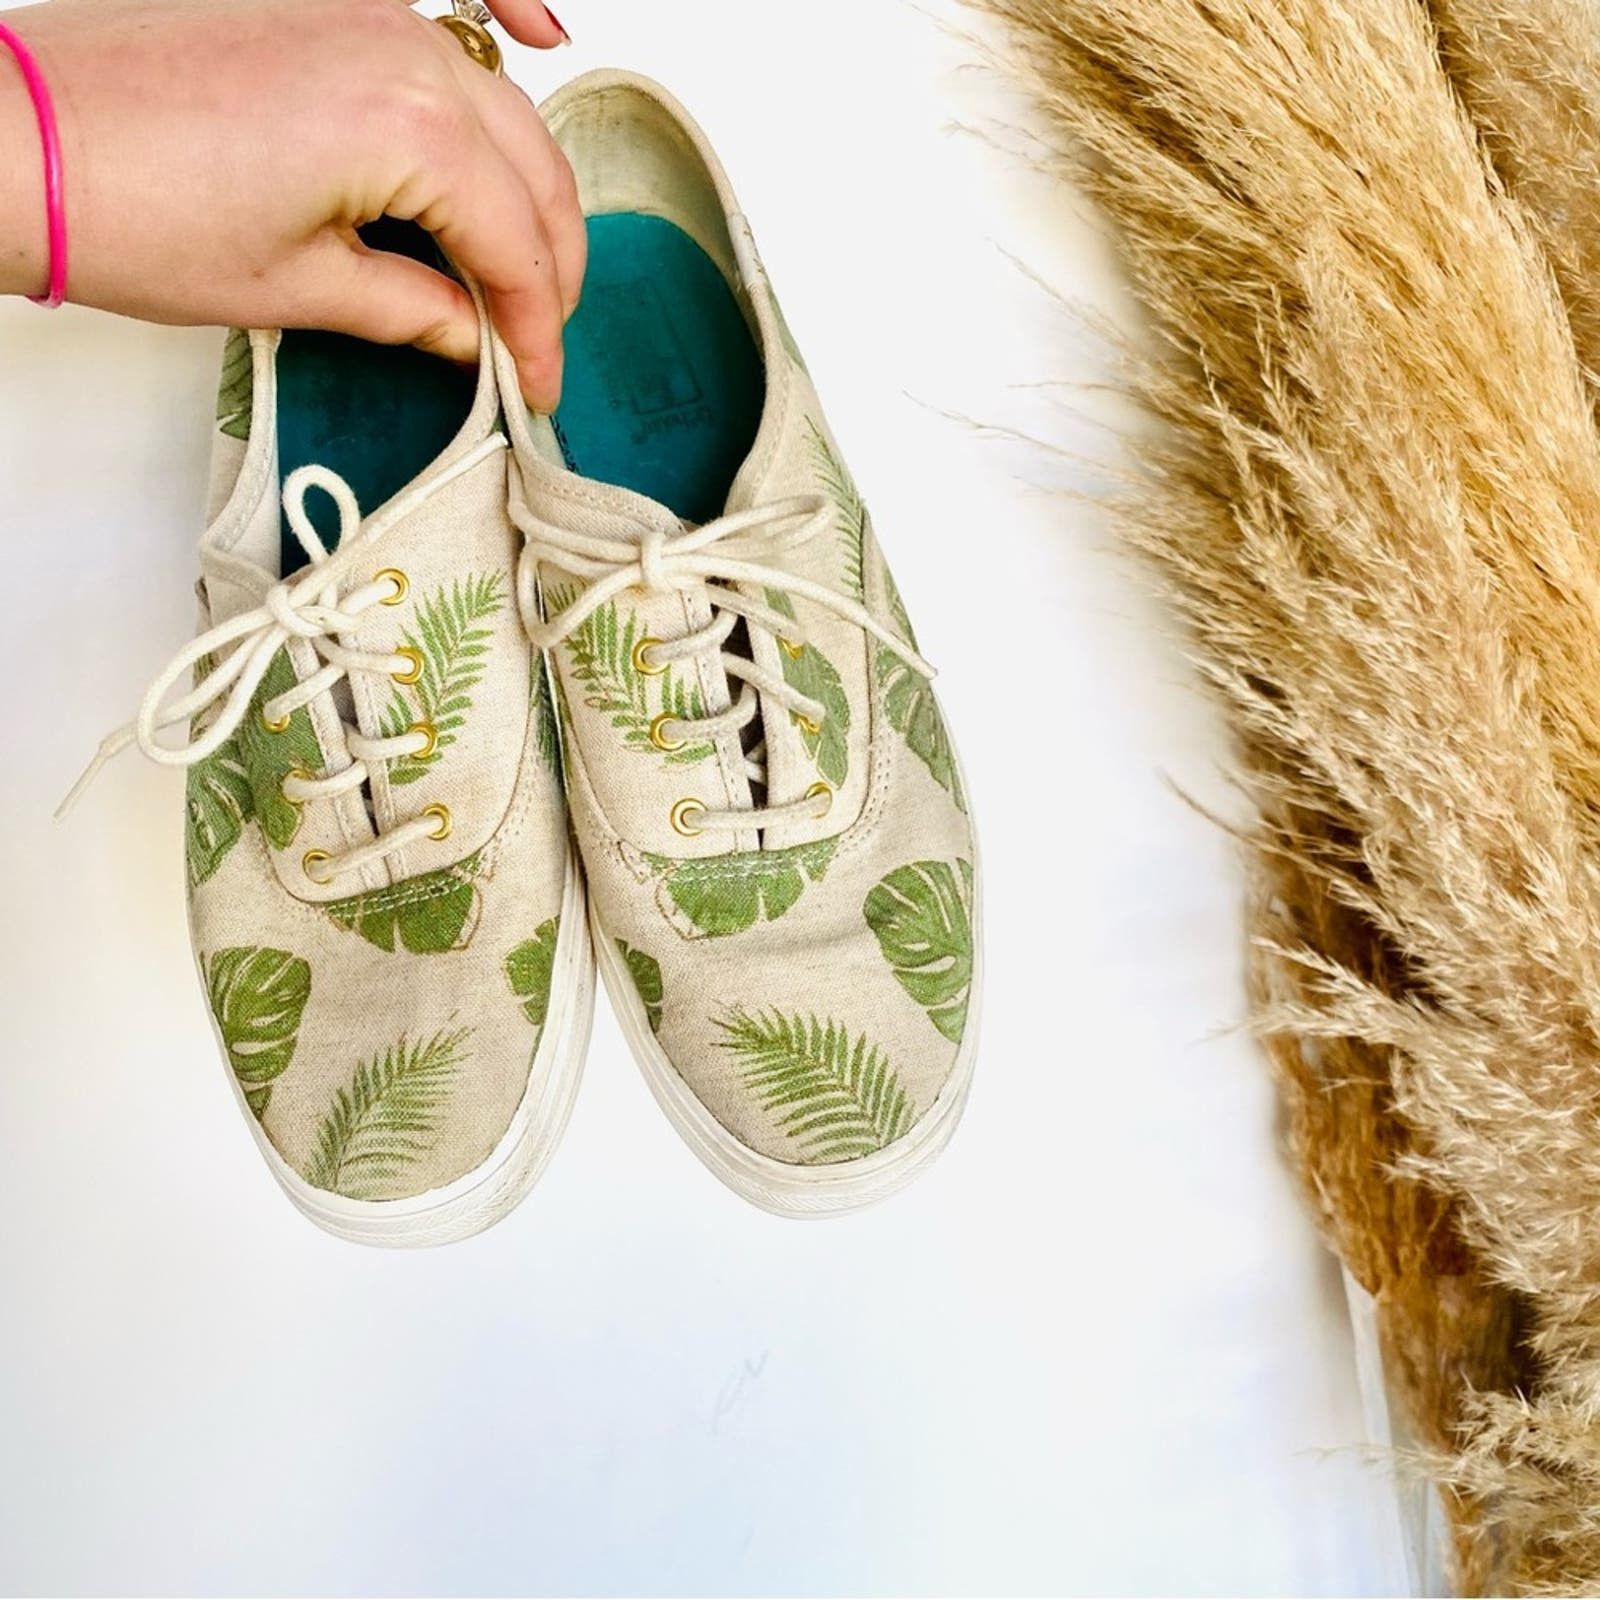 Anthropologie ANTHROPOLOGIE KEDS Cream Green Palm Leaf Platform Sneakers Size US 8.5 / IT 38.5 - 12 Preview